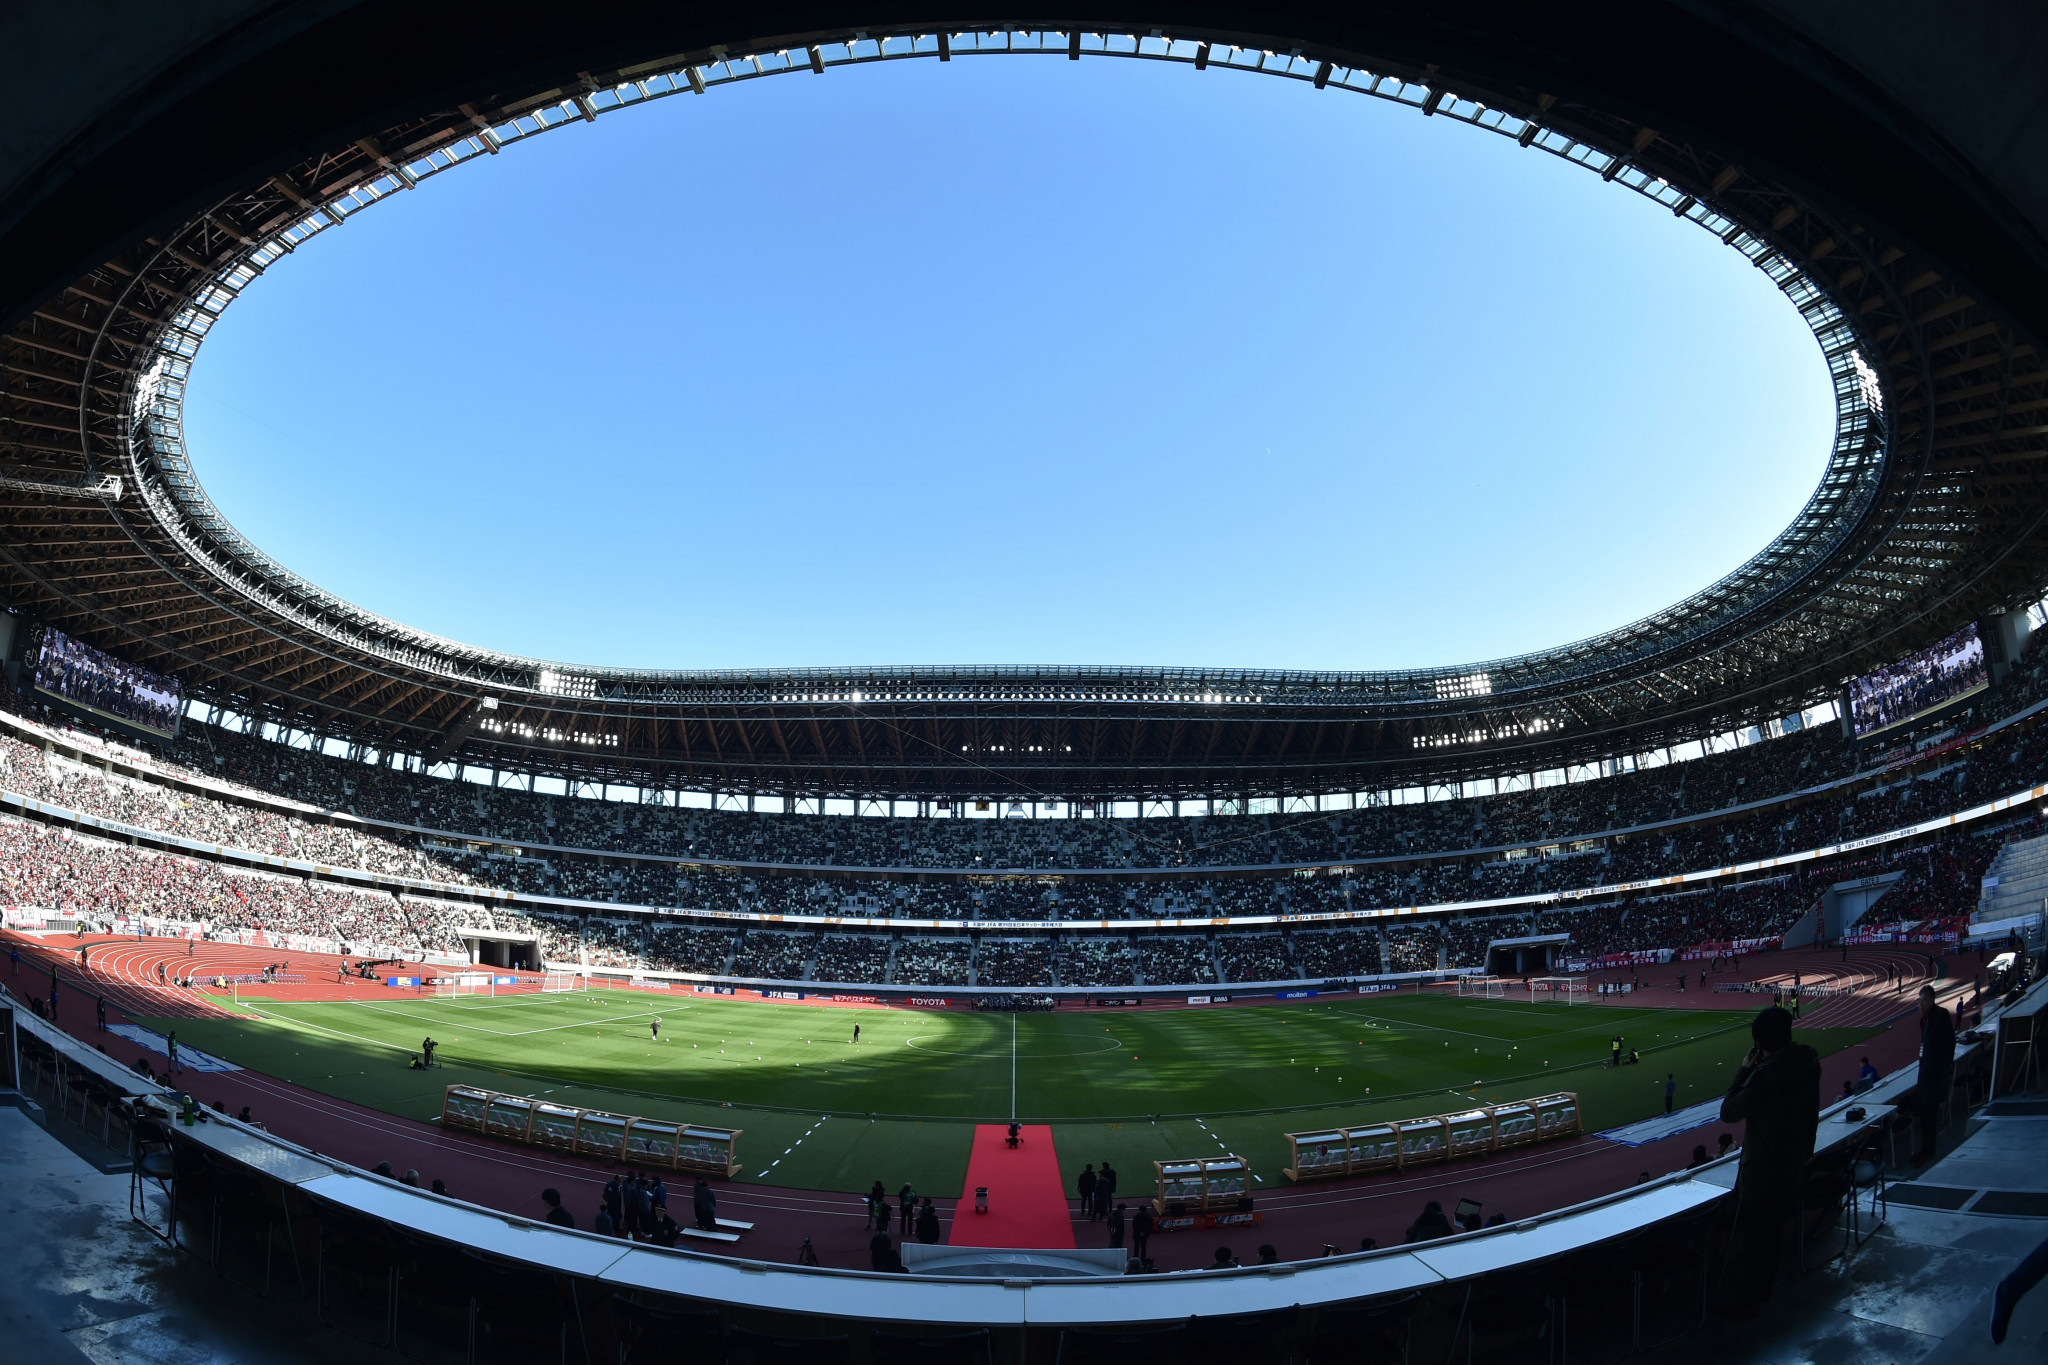 The New National Stadium built for this year's Olympic and Paralympic Games in Tokyo was blessed by sunshine as it hosted the Emperor's Cup final, a match won by Vissel Kobe ©Getty Images